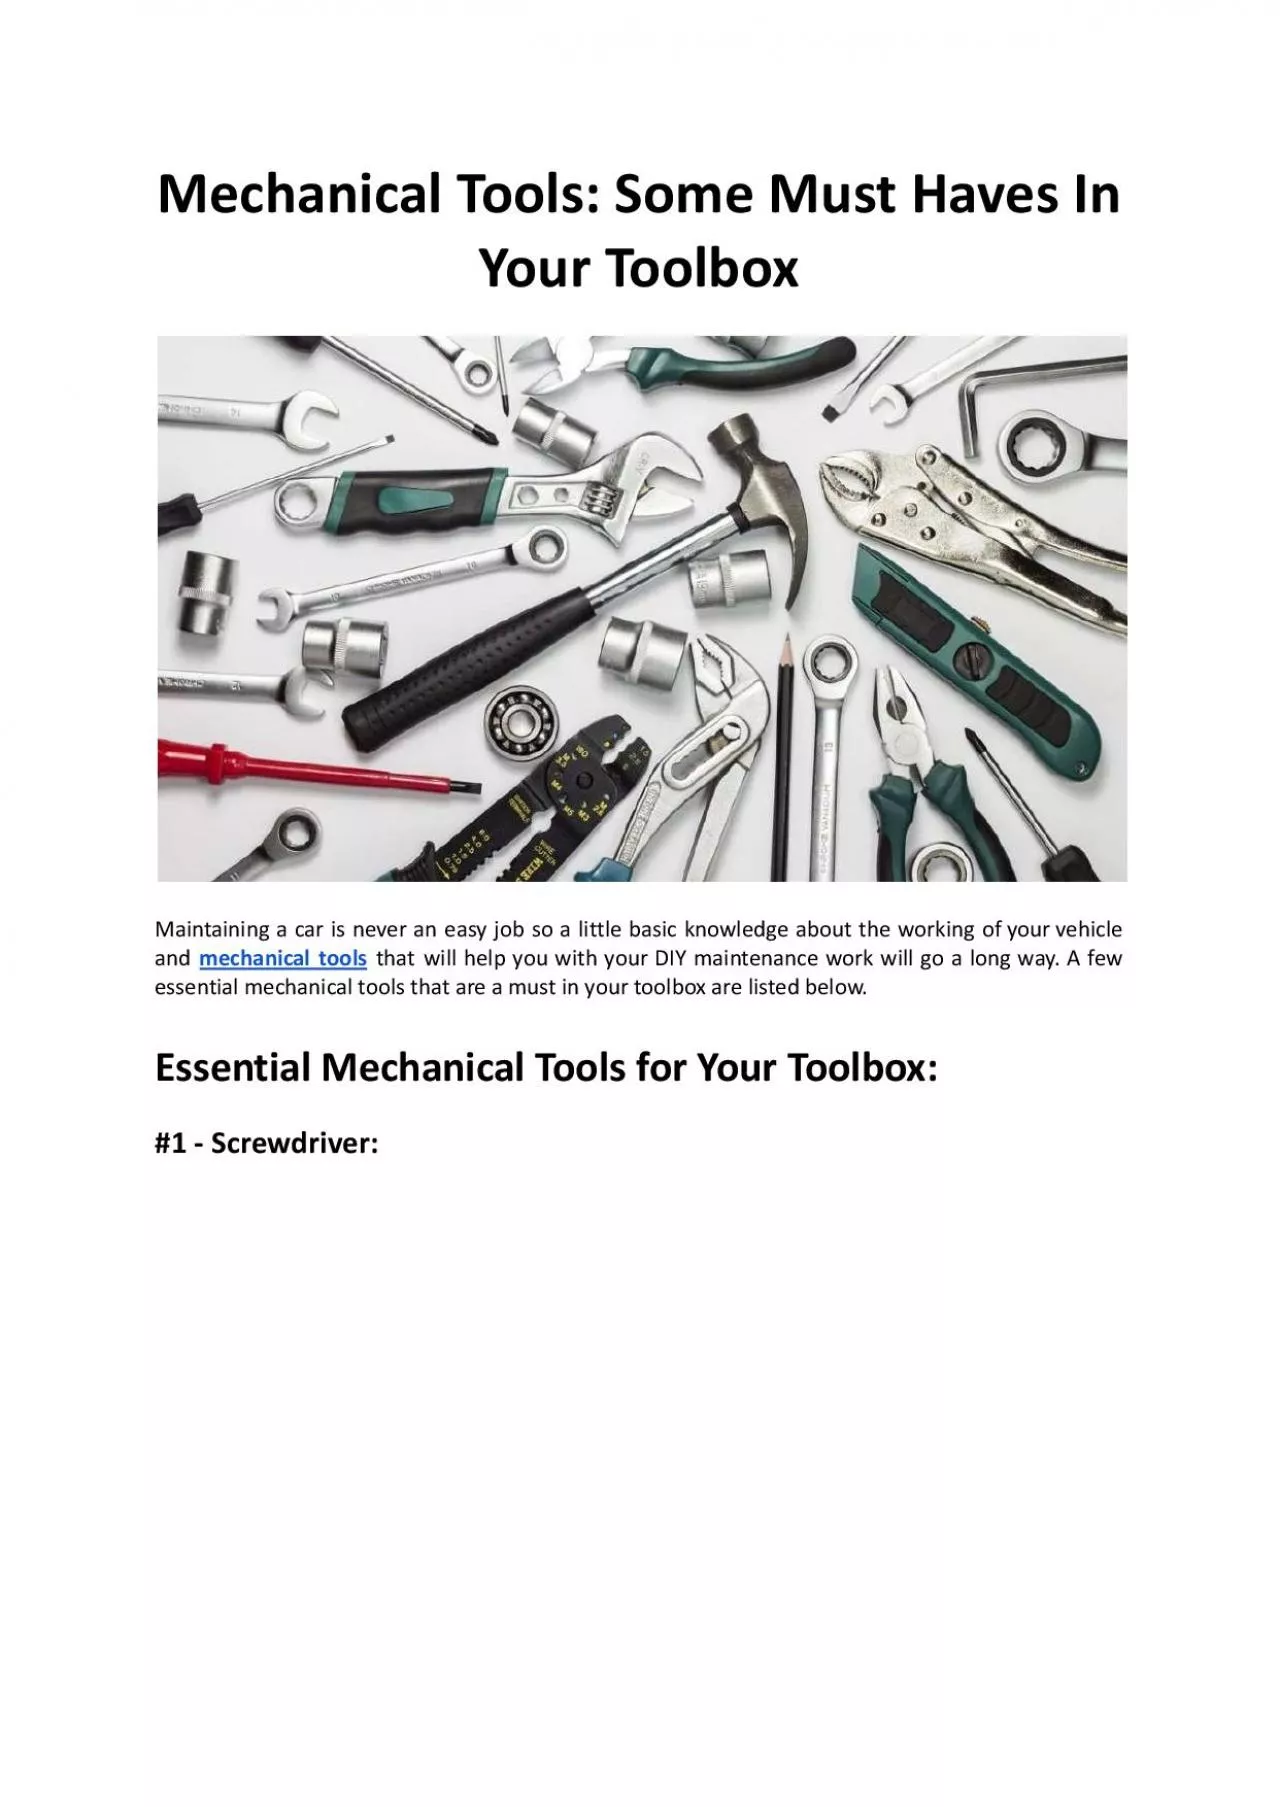 Mechanical Tools: Some Must Haves In Your Toolbox